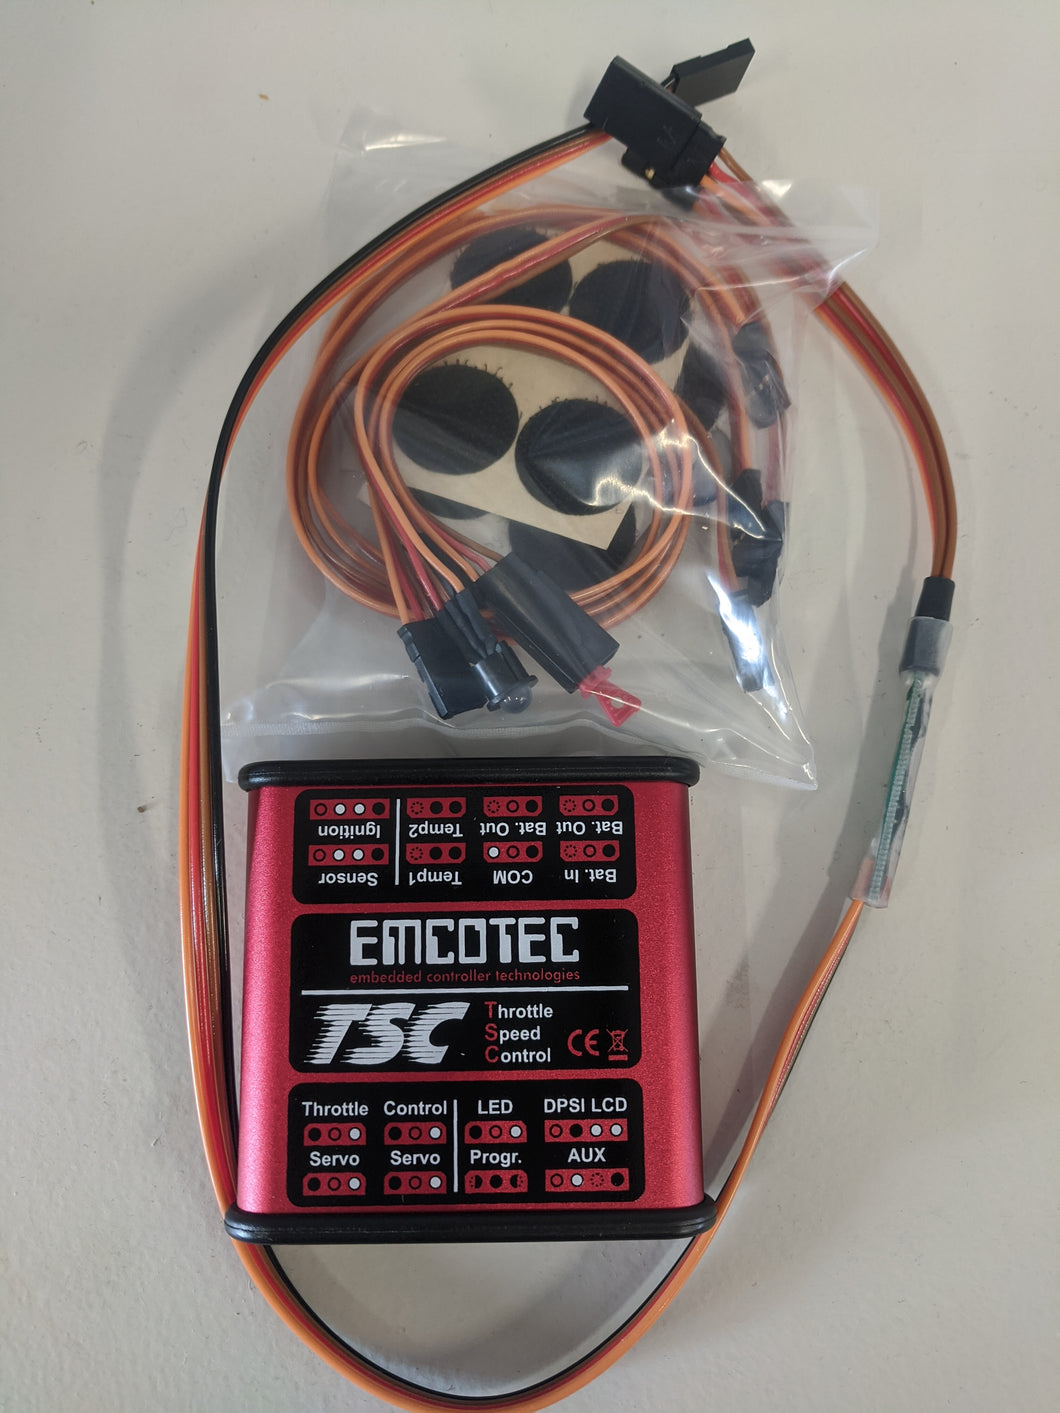 EMCOTEC TSC Throttle Speed Controller for Petrol Engines